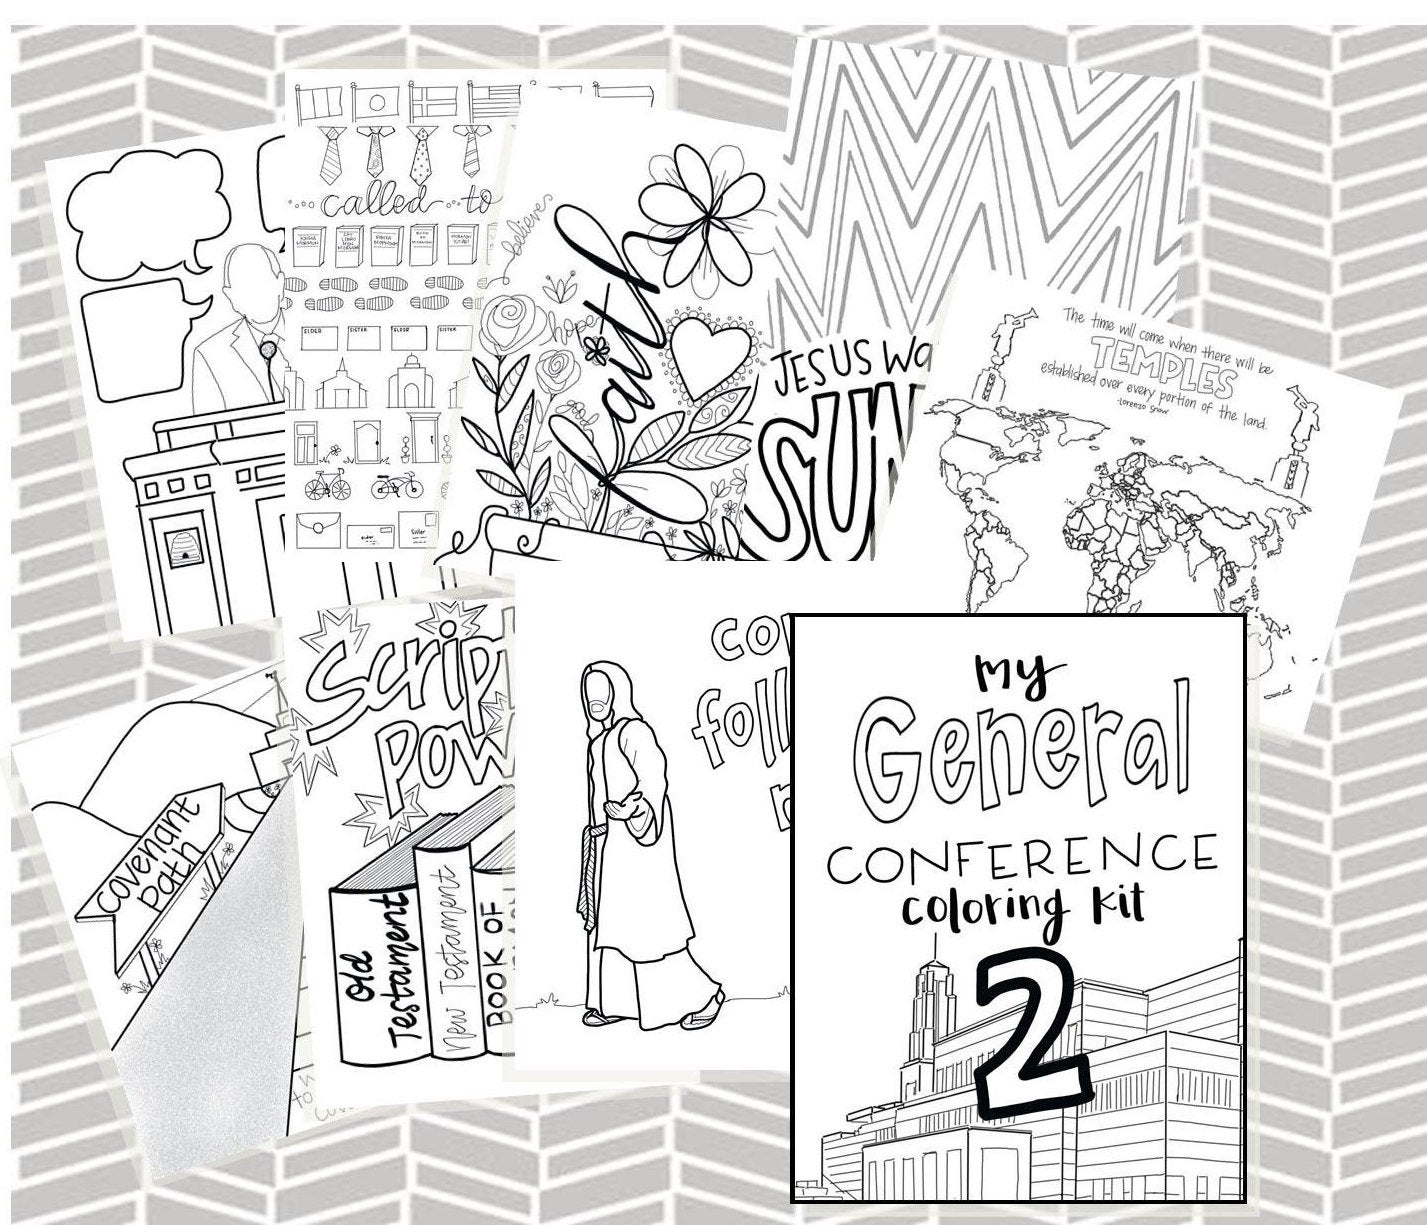 The Church Began Coloring Page General Conference Coloring Kit 20 General Conference Packet